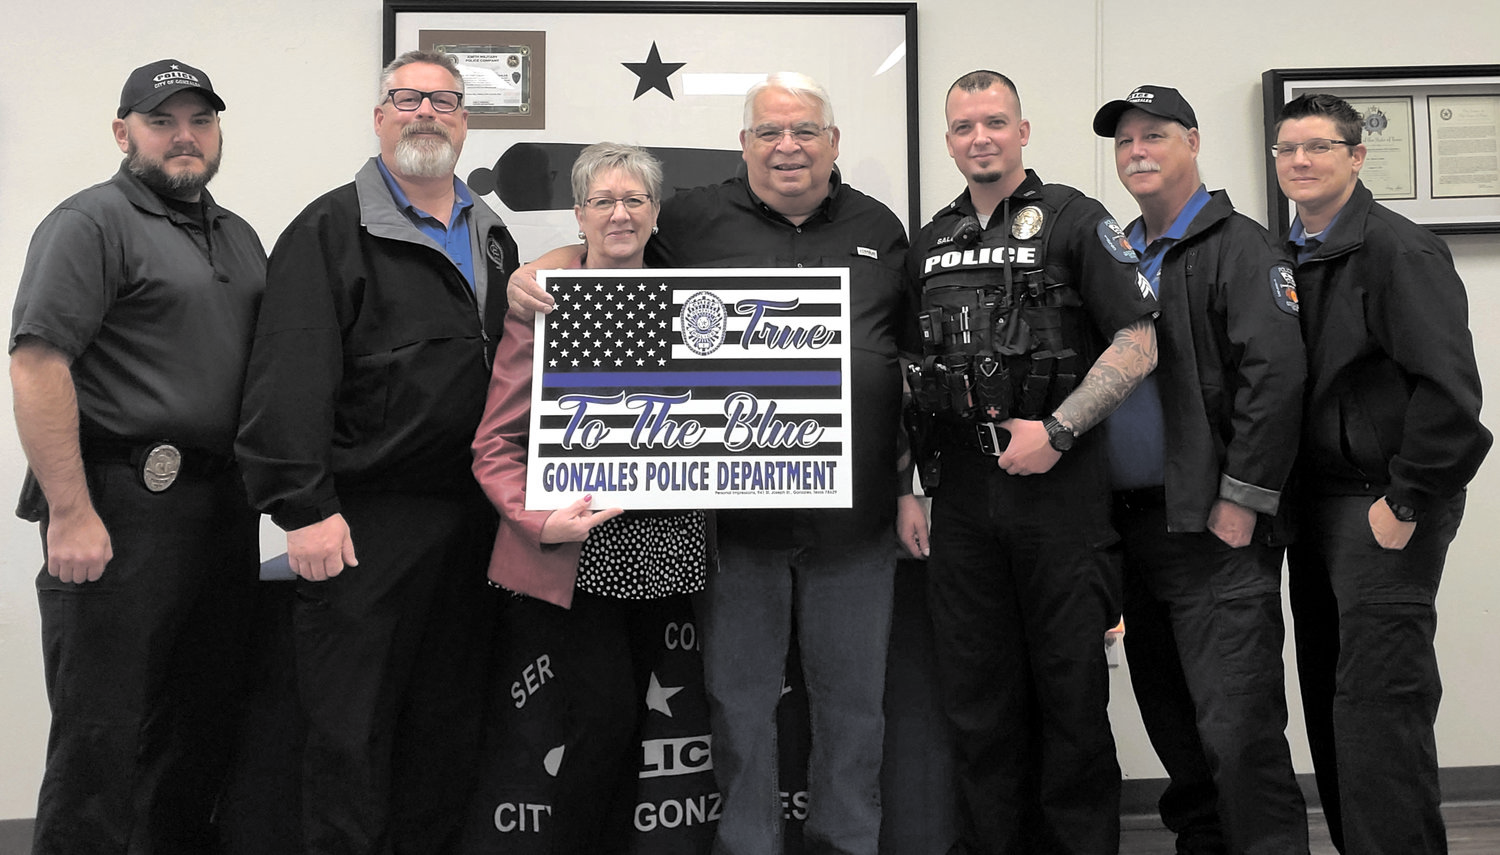 Personal Impressions owners Andy and Cindy Rodriguez give specially designed signs with “True to the Blue” to the Gonzales Police Department.